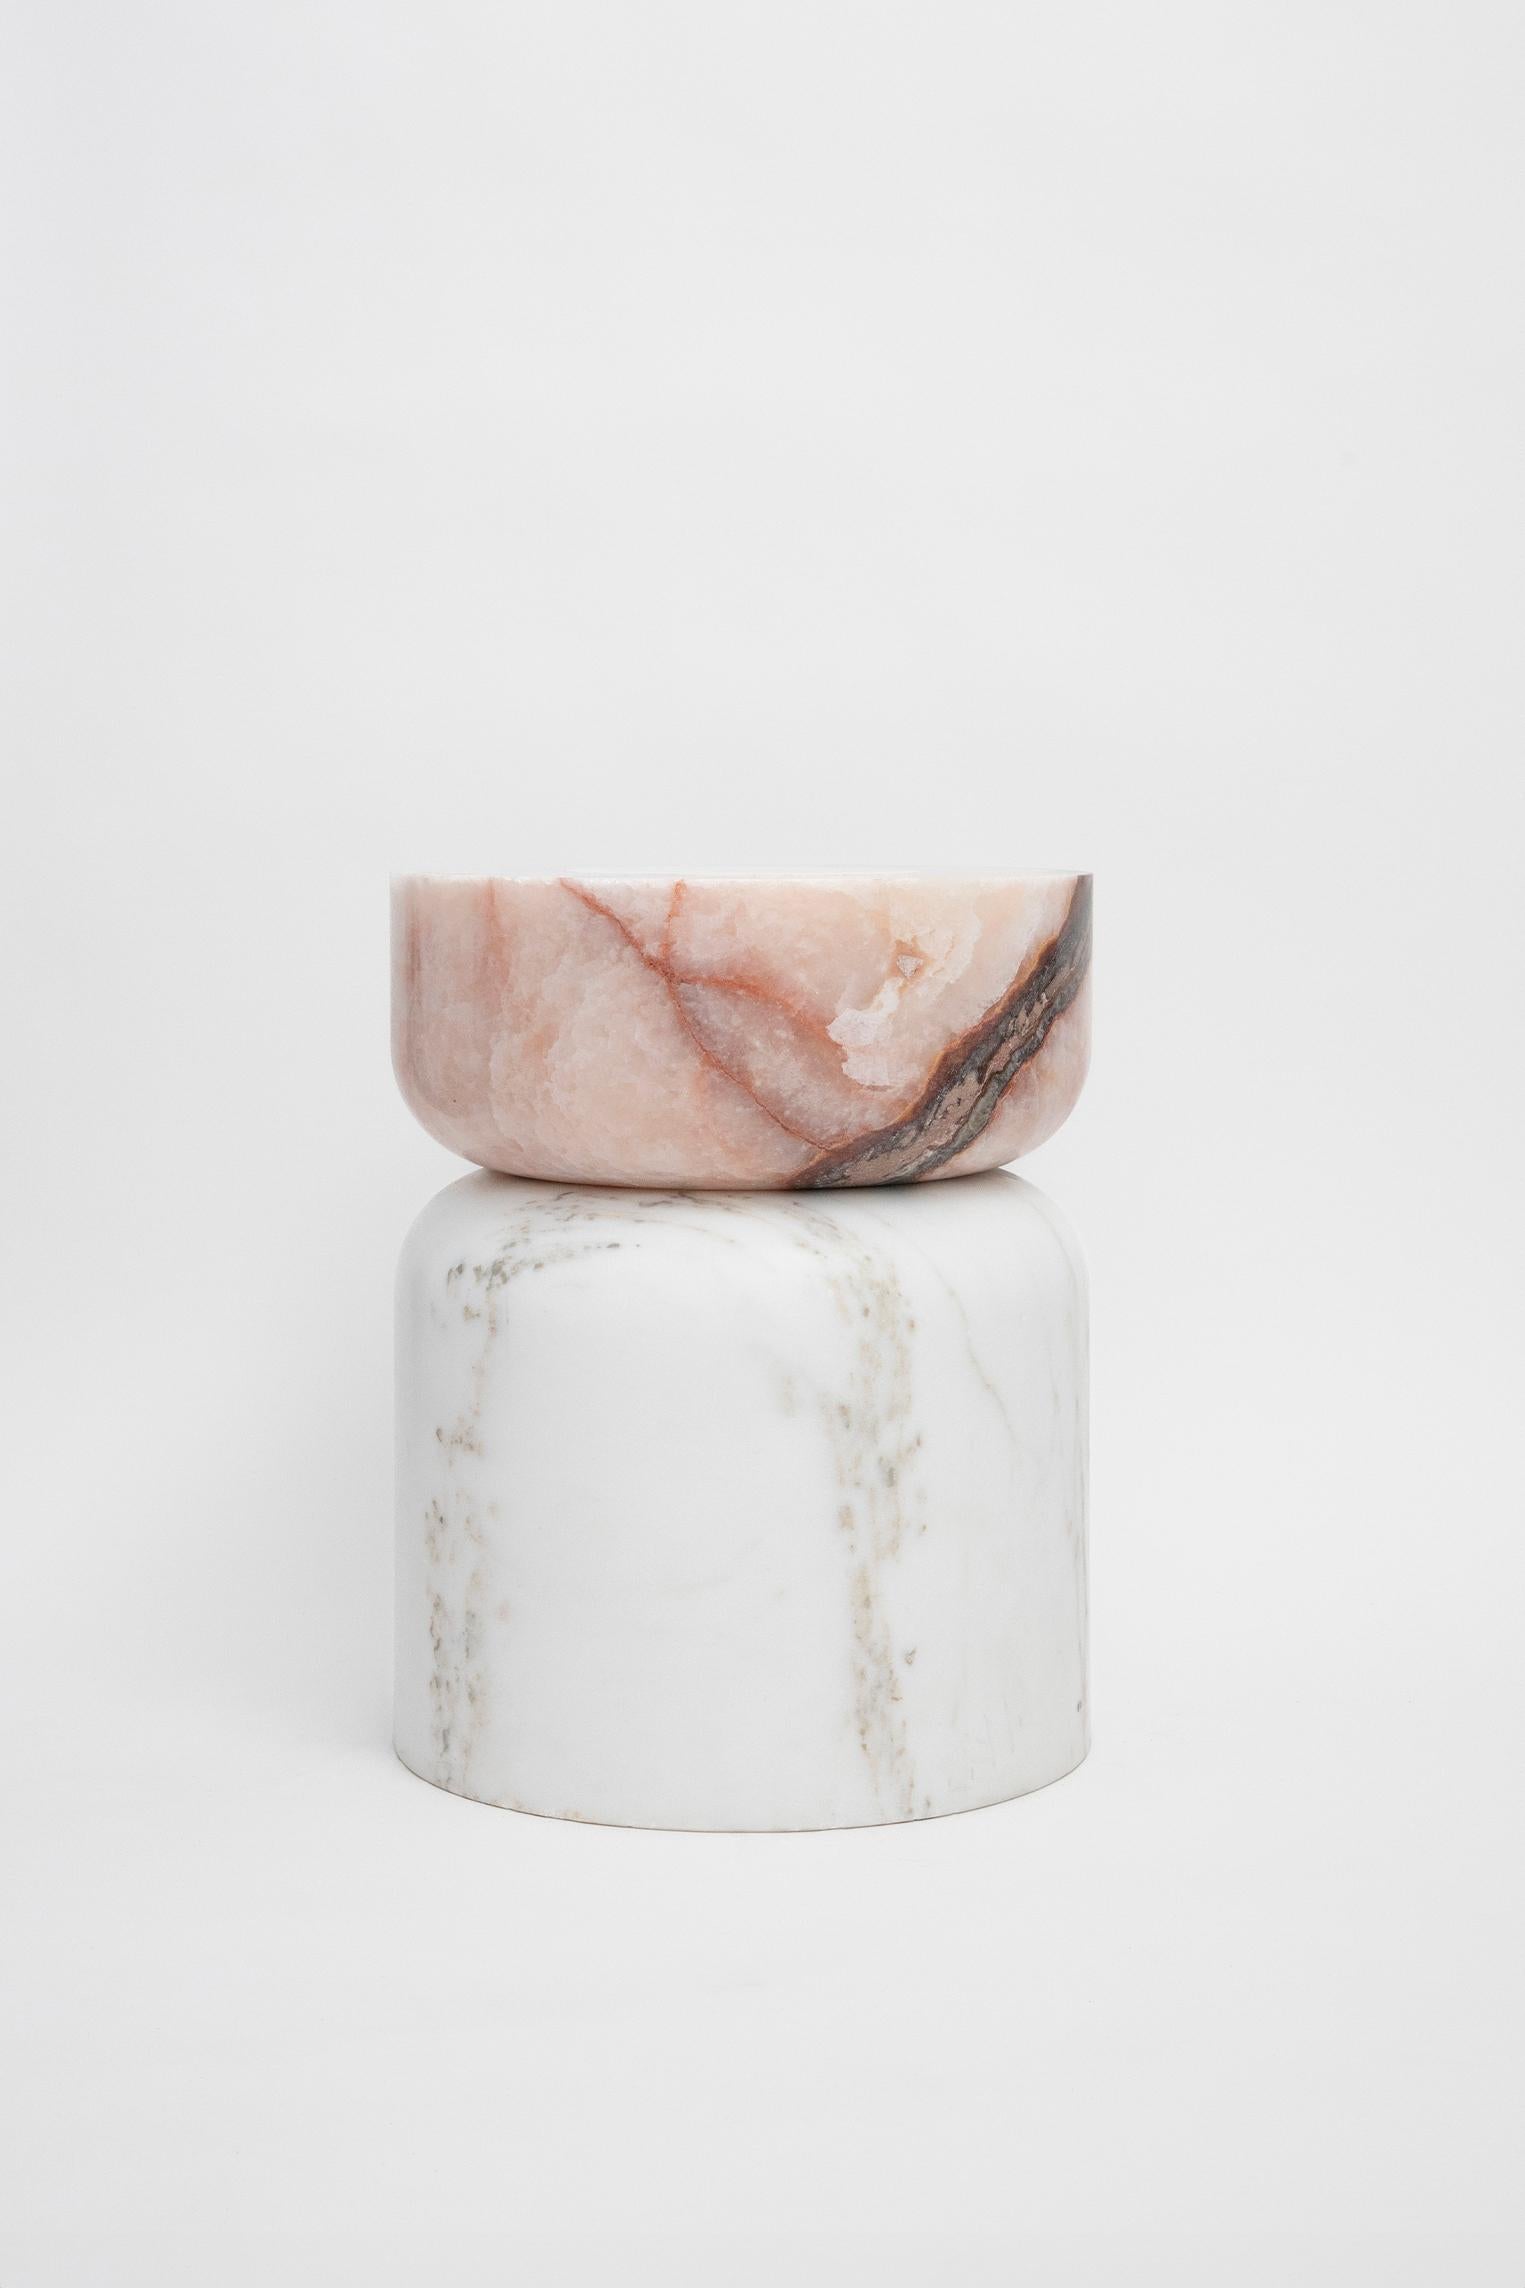 Volcanic Shade of Marble IV

Golden calacatta marble, pink onyx.
Pineapple onyx marble
13.7 x 13.7 x 17.1 in

Serving as a visual metaphor for volcanoes that, through their craters, open faultlines into the Earth’s core, they are made from